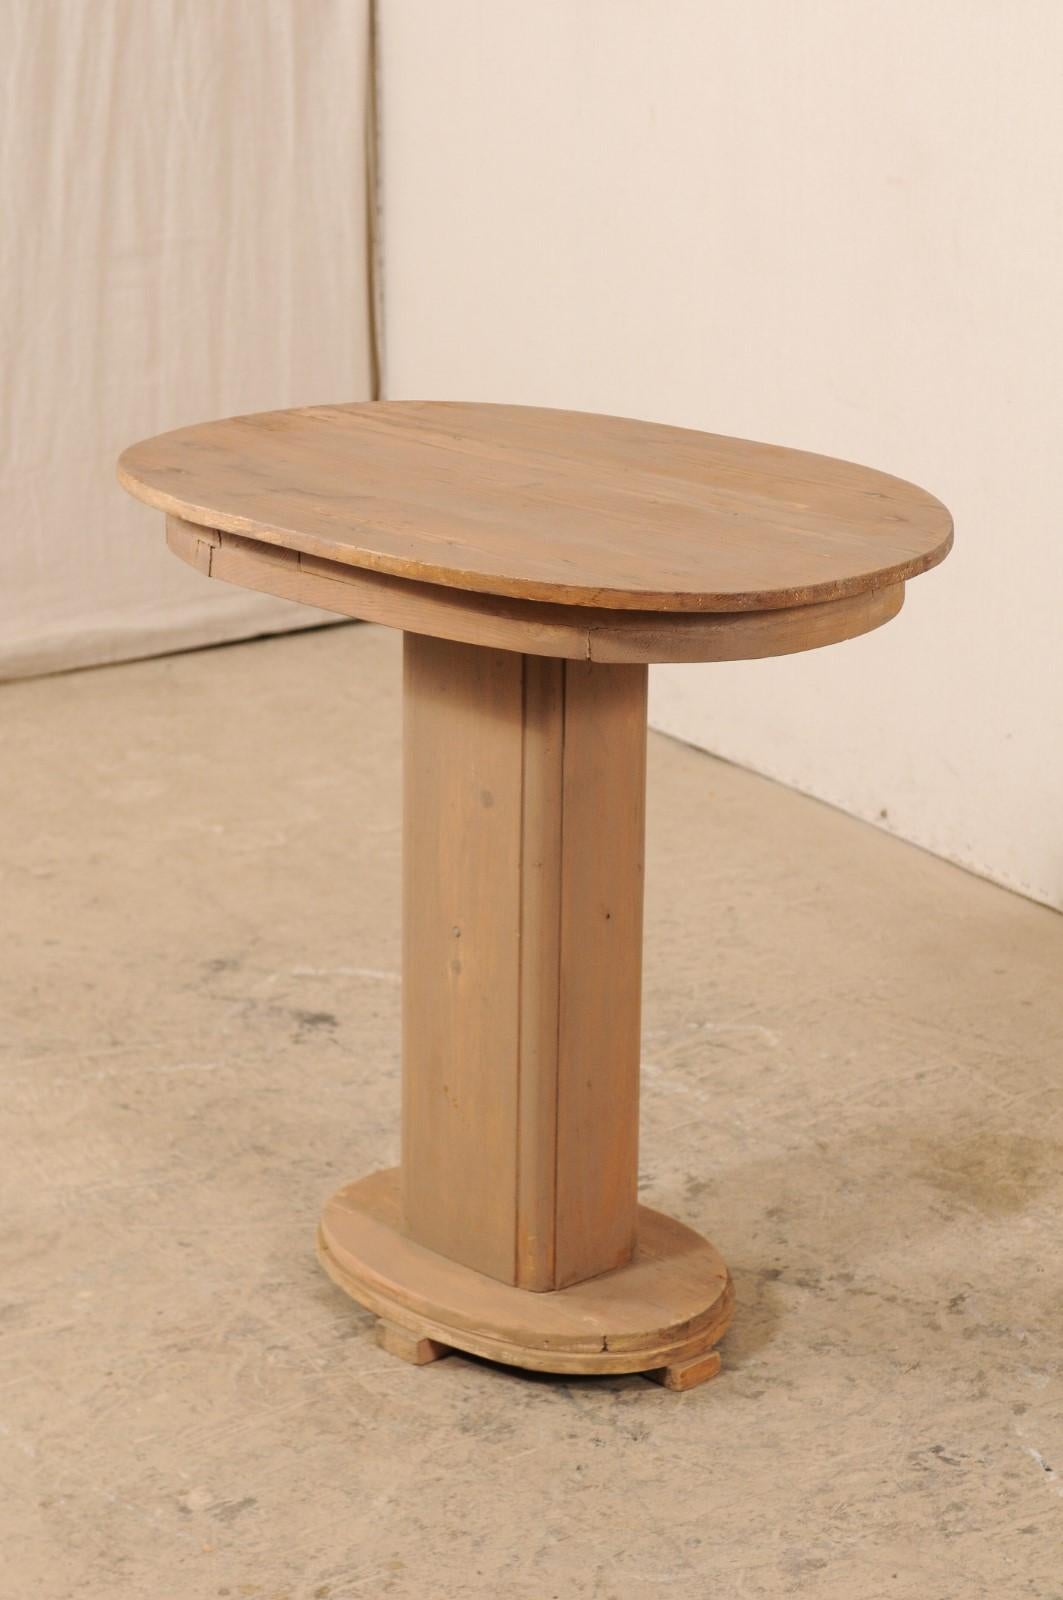 French Mid-20th Century Painted Wood Oval Top Pedestal Table In Good Condition For Sale In Atlanta, GA